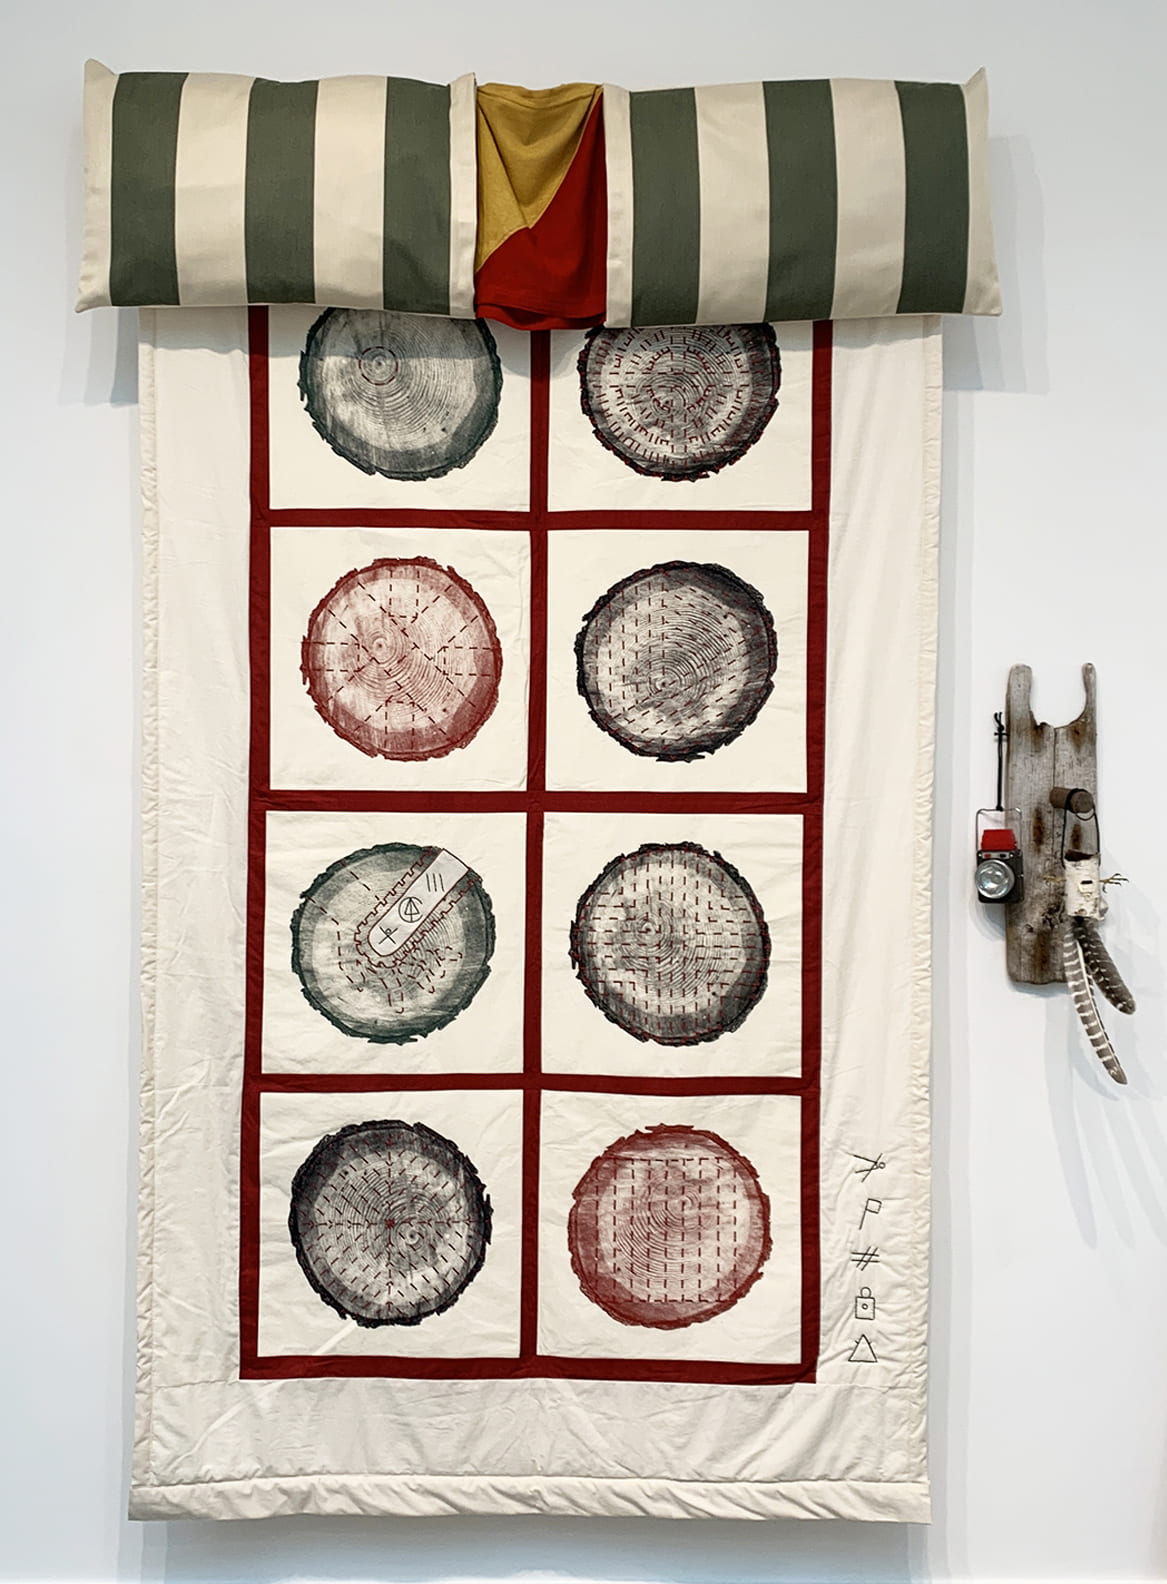 Red, green, and cream colored quilt hangs off wall. Square panels show prints of tree rings